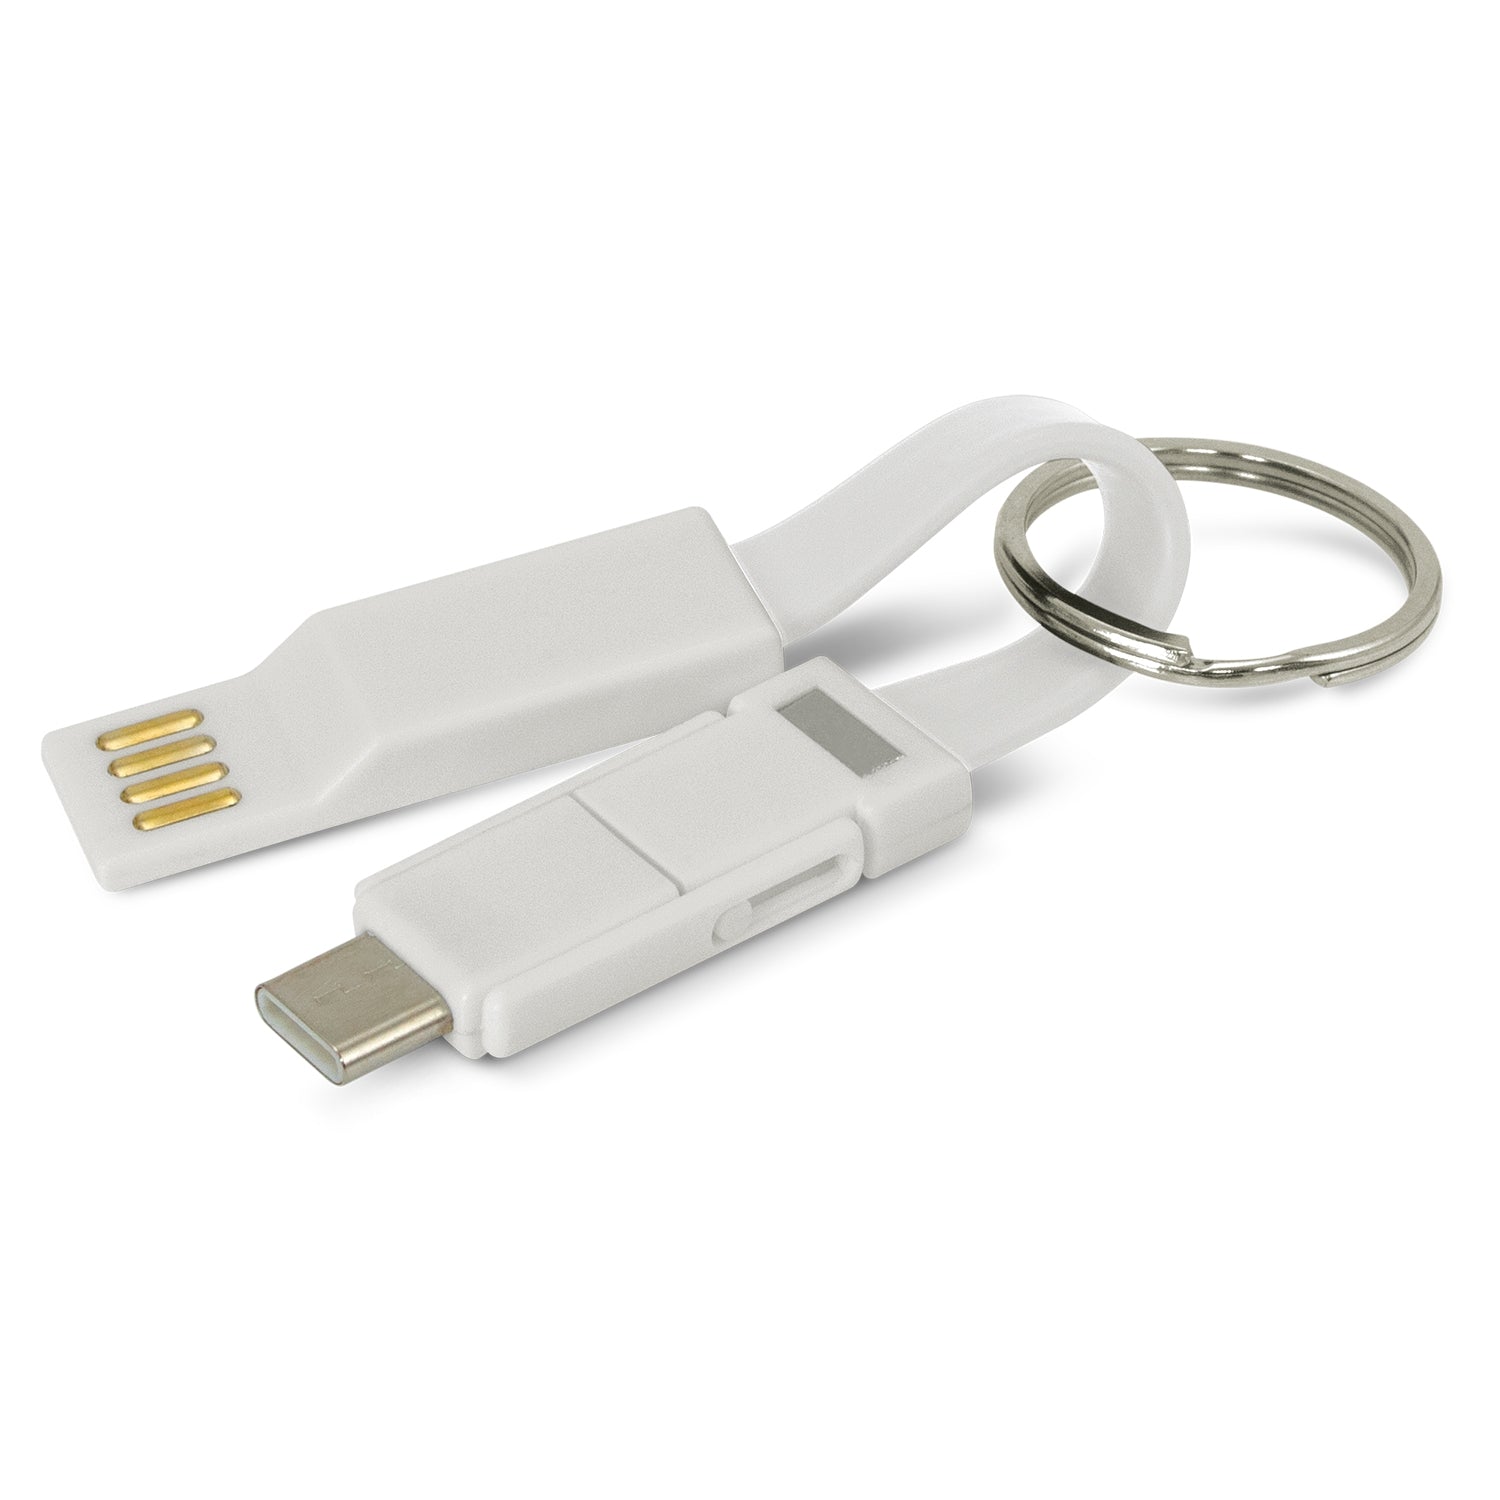 Electron 3in1 Charging Cable [116102]